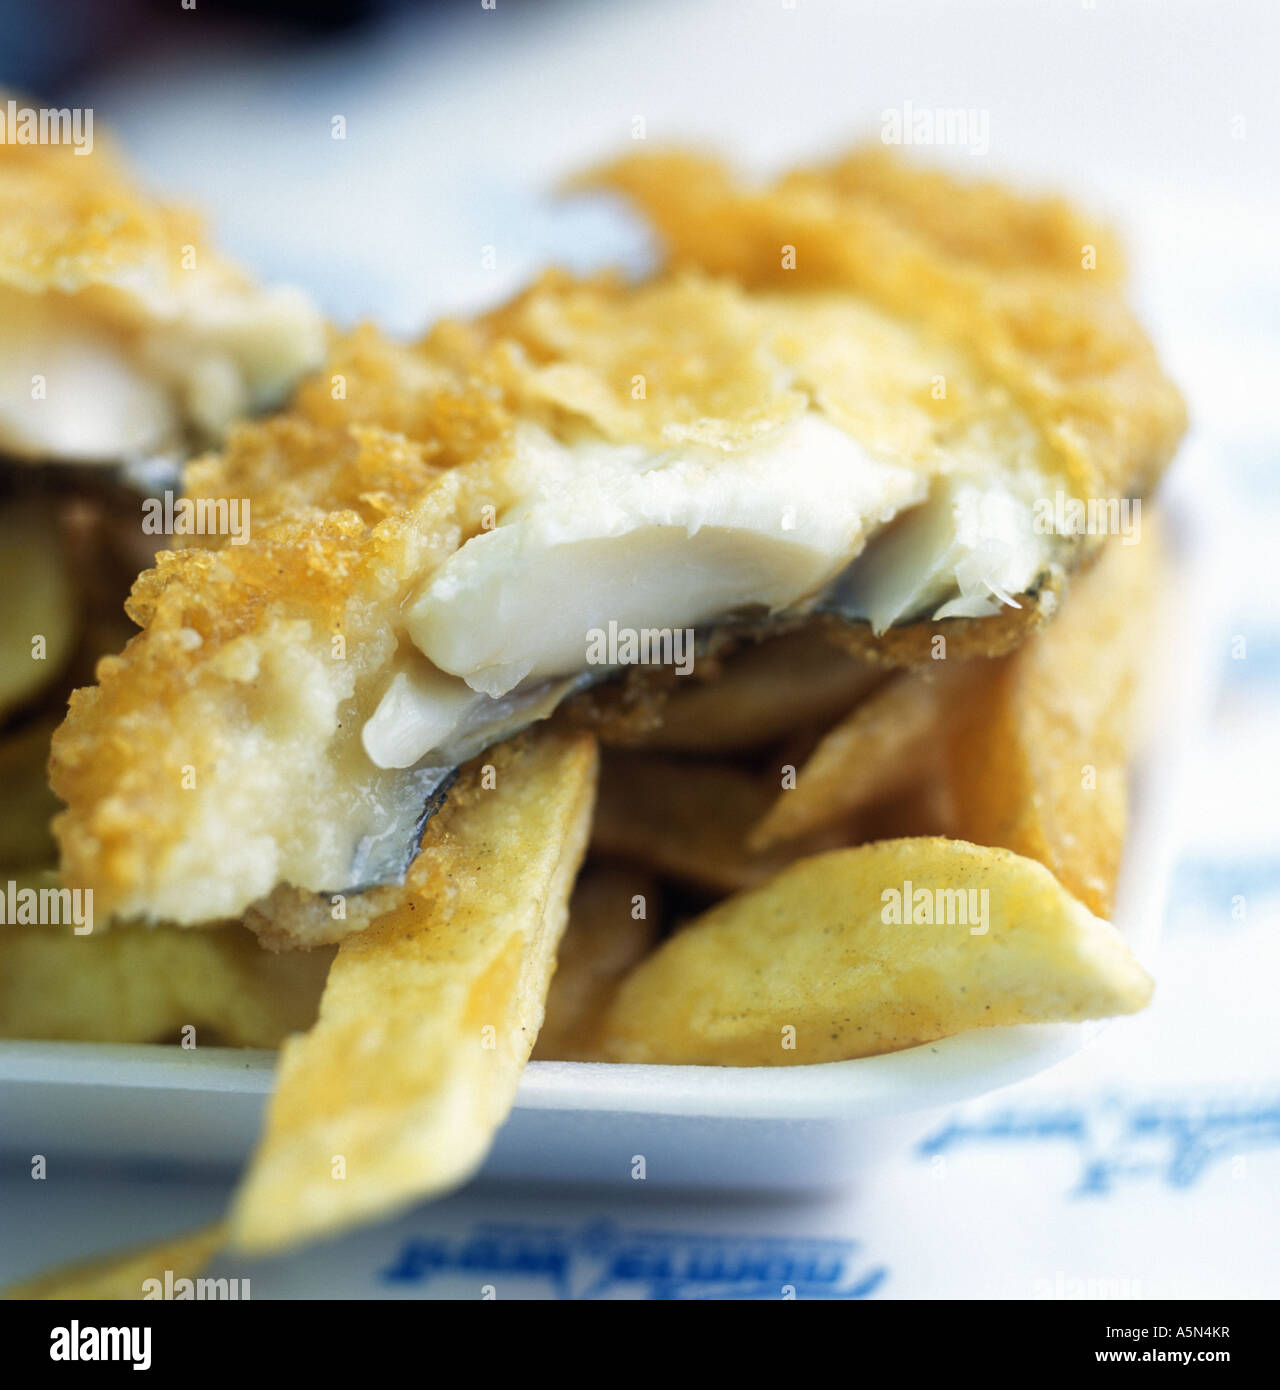 a portion of fish and chips Stock Photo